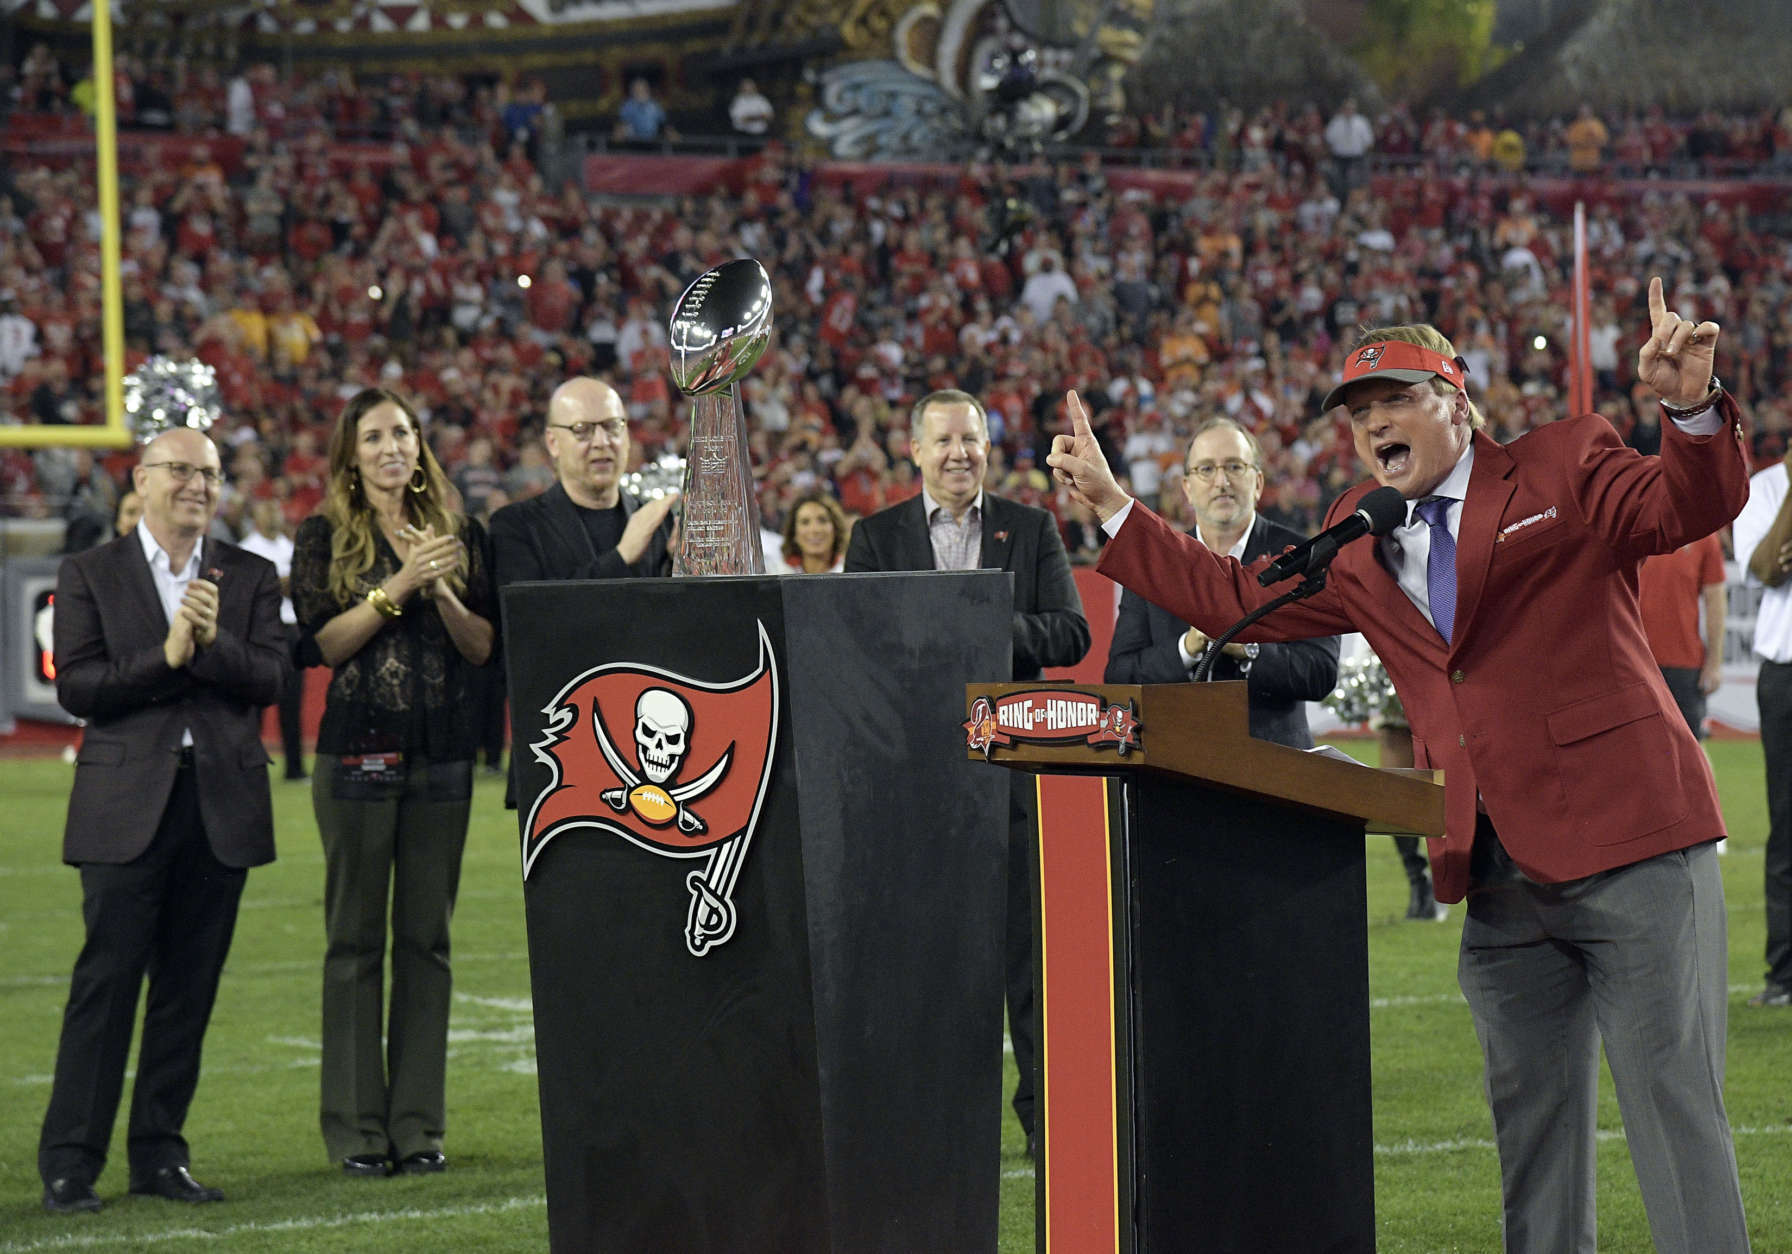 Former Tampa Bay Buccaneers Jon Gruden, far right, raises his arms to the fans as he is inducted into the teams Ring of Honor during halftime at an NFL football game between the Tampa Bay Buccaneers and the Atlanta Falcons, Monday, Dec. 18, 2017, in Tampa, Fla. (AP Photo/Phelan M. Ebenhack)